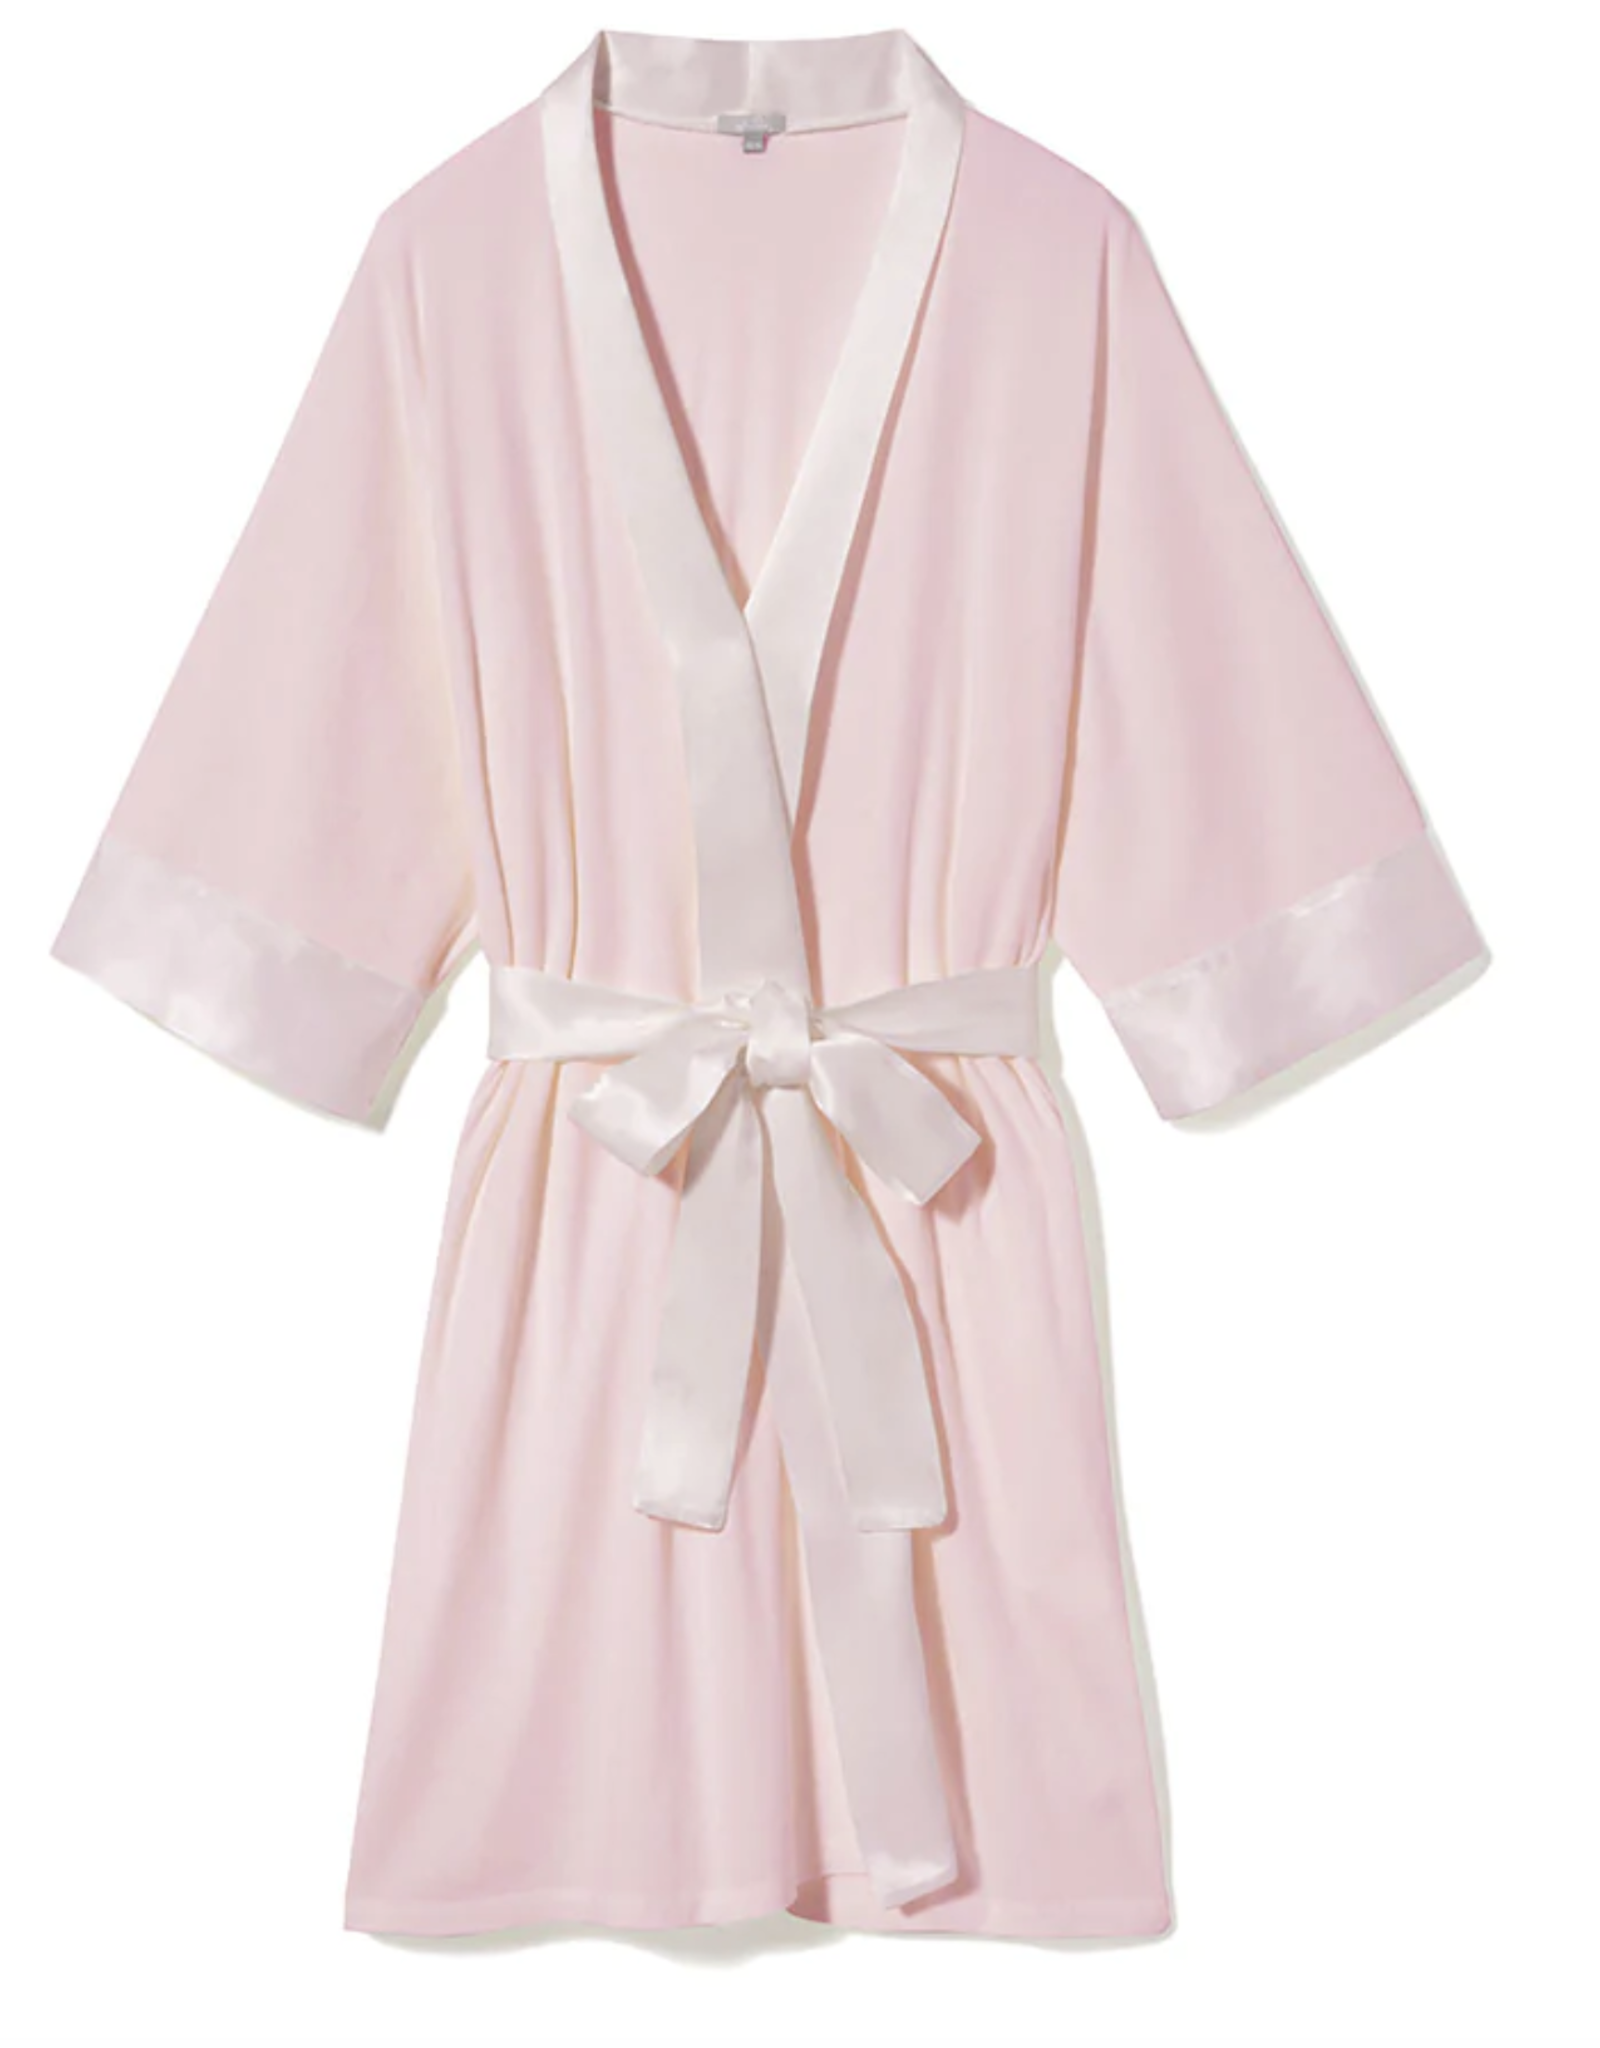 PJ Harlow Shala Robe With Attached Belt